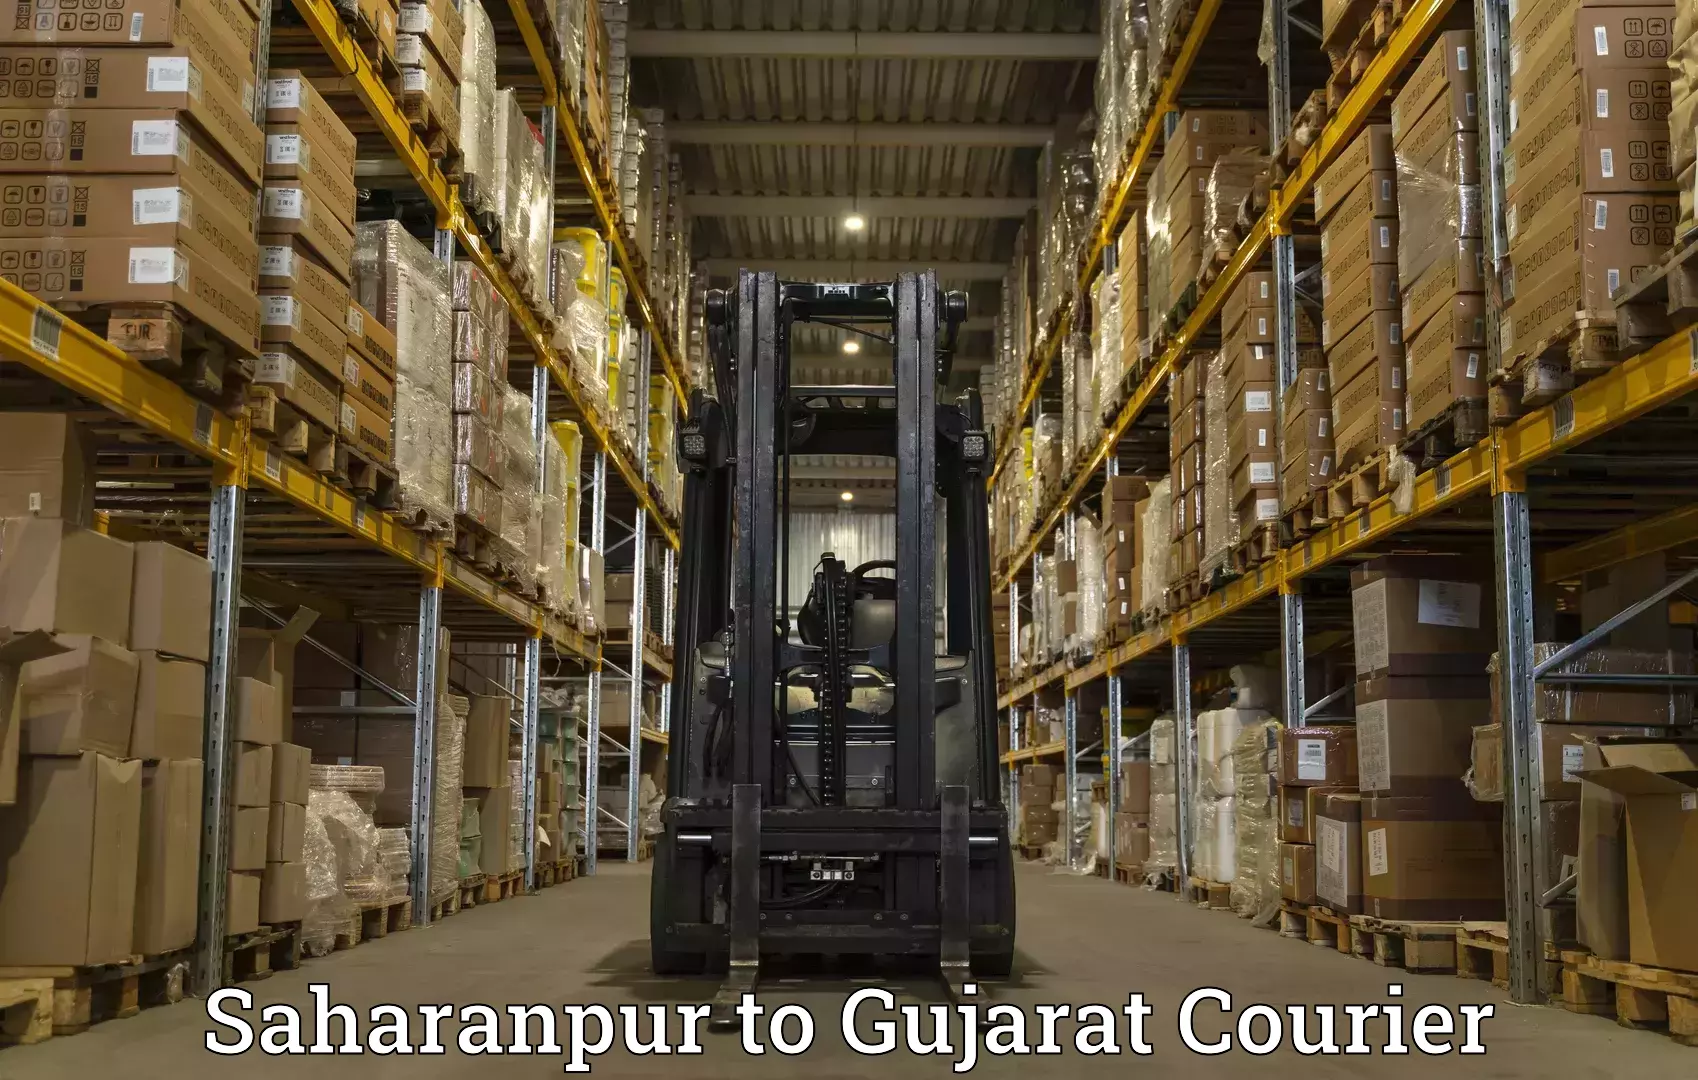 State-of-the-art courier technology Saharanpur to Lunawada